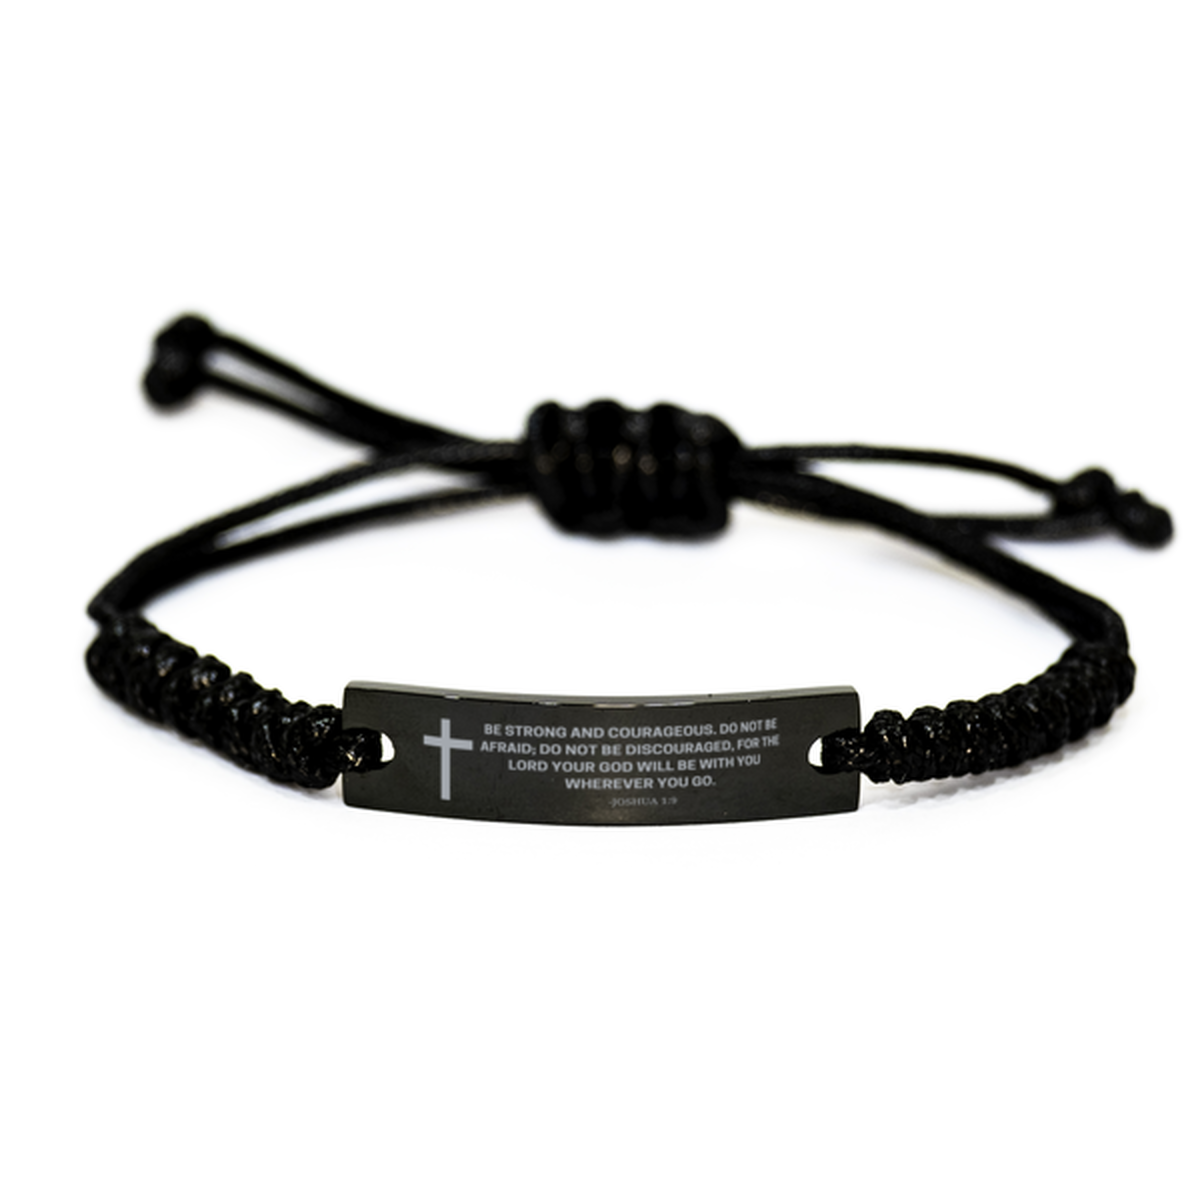 Baptism Gifts For Teenage Boys Girls, Christian Bible Verse Black Rope Bracelet, For the lord your God will be with you, Catholic Confirmation Gifts for Son, Godson, Grandson, Nephew